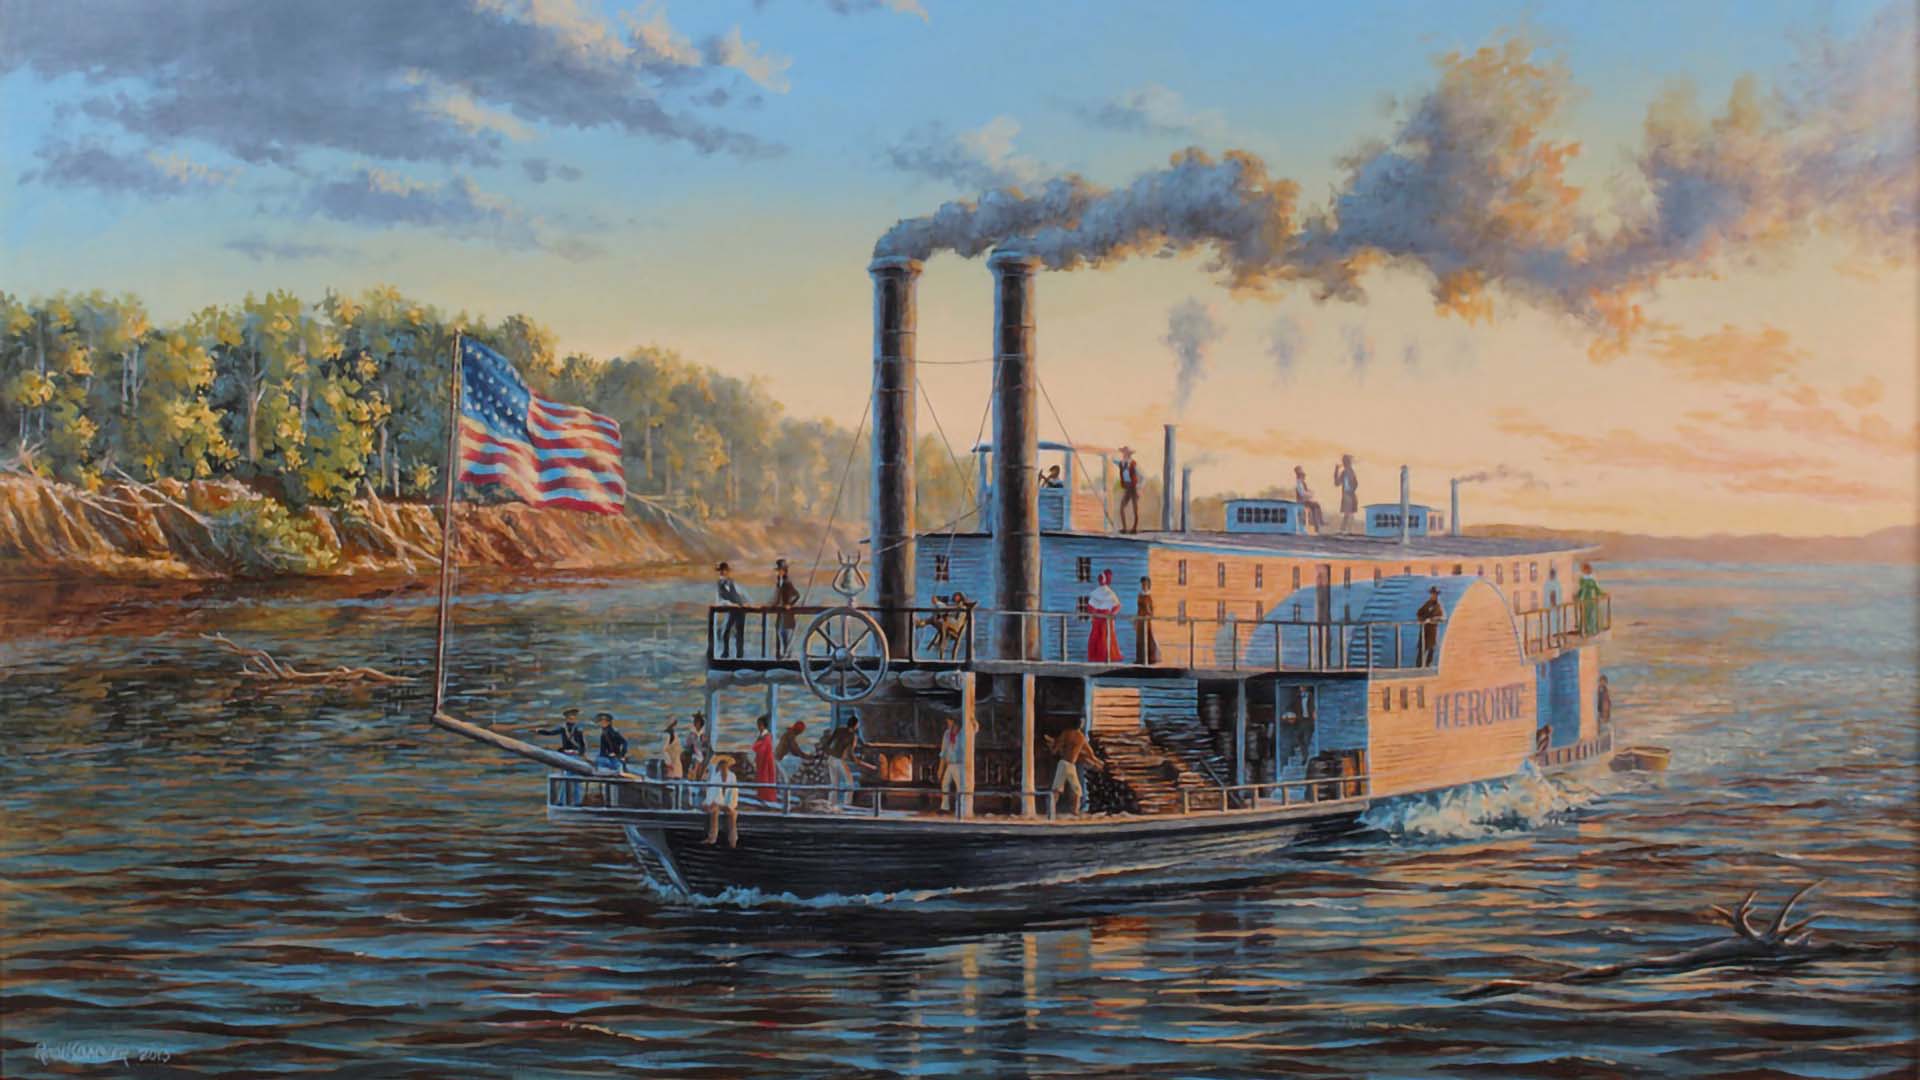 Painting of the "Steamboat Heroine" of 1832 by Peter Rindlisbacher. Image via The Oklahoman and The Oklahoma History Center.